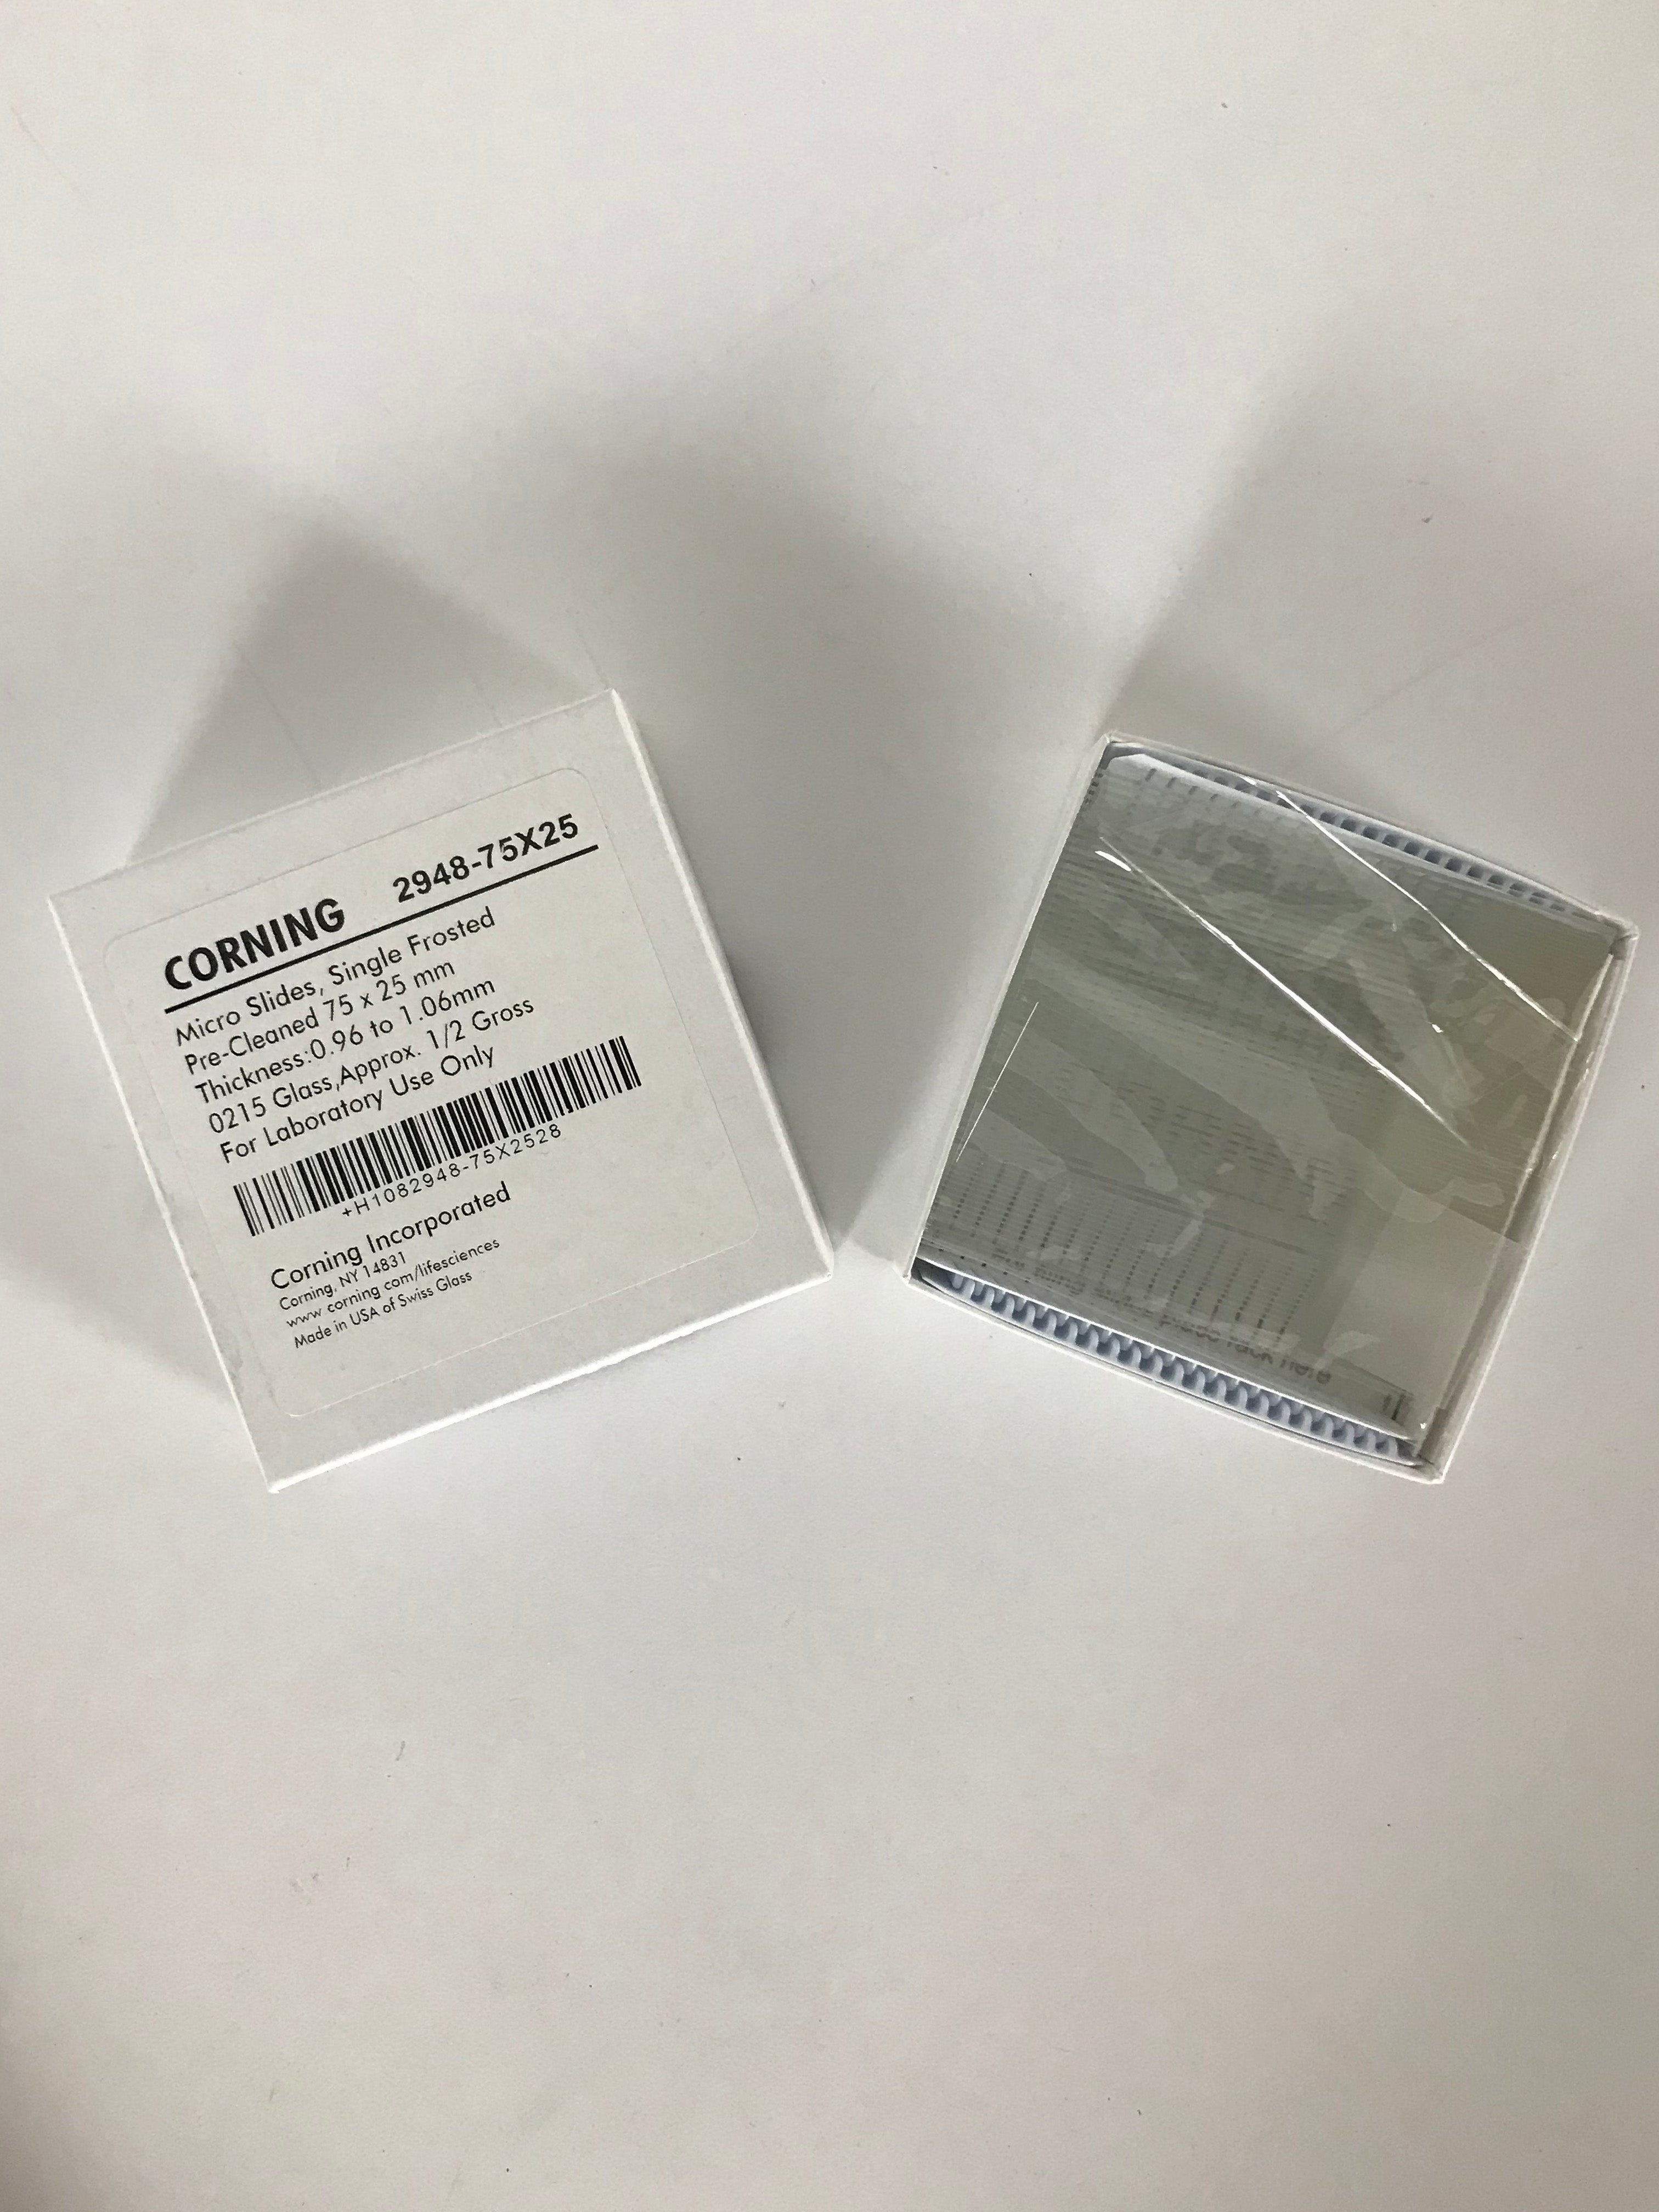 Corning Single Frosted Micro Slides